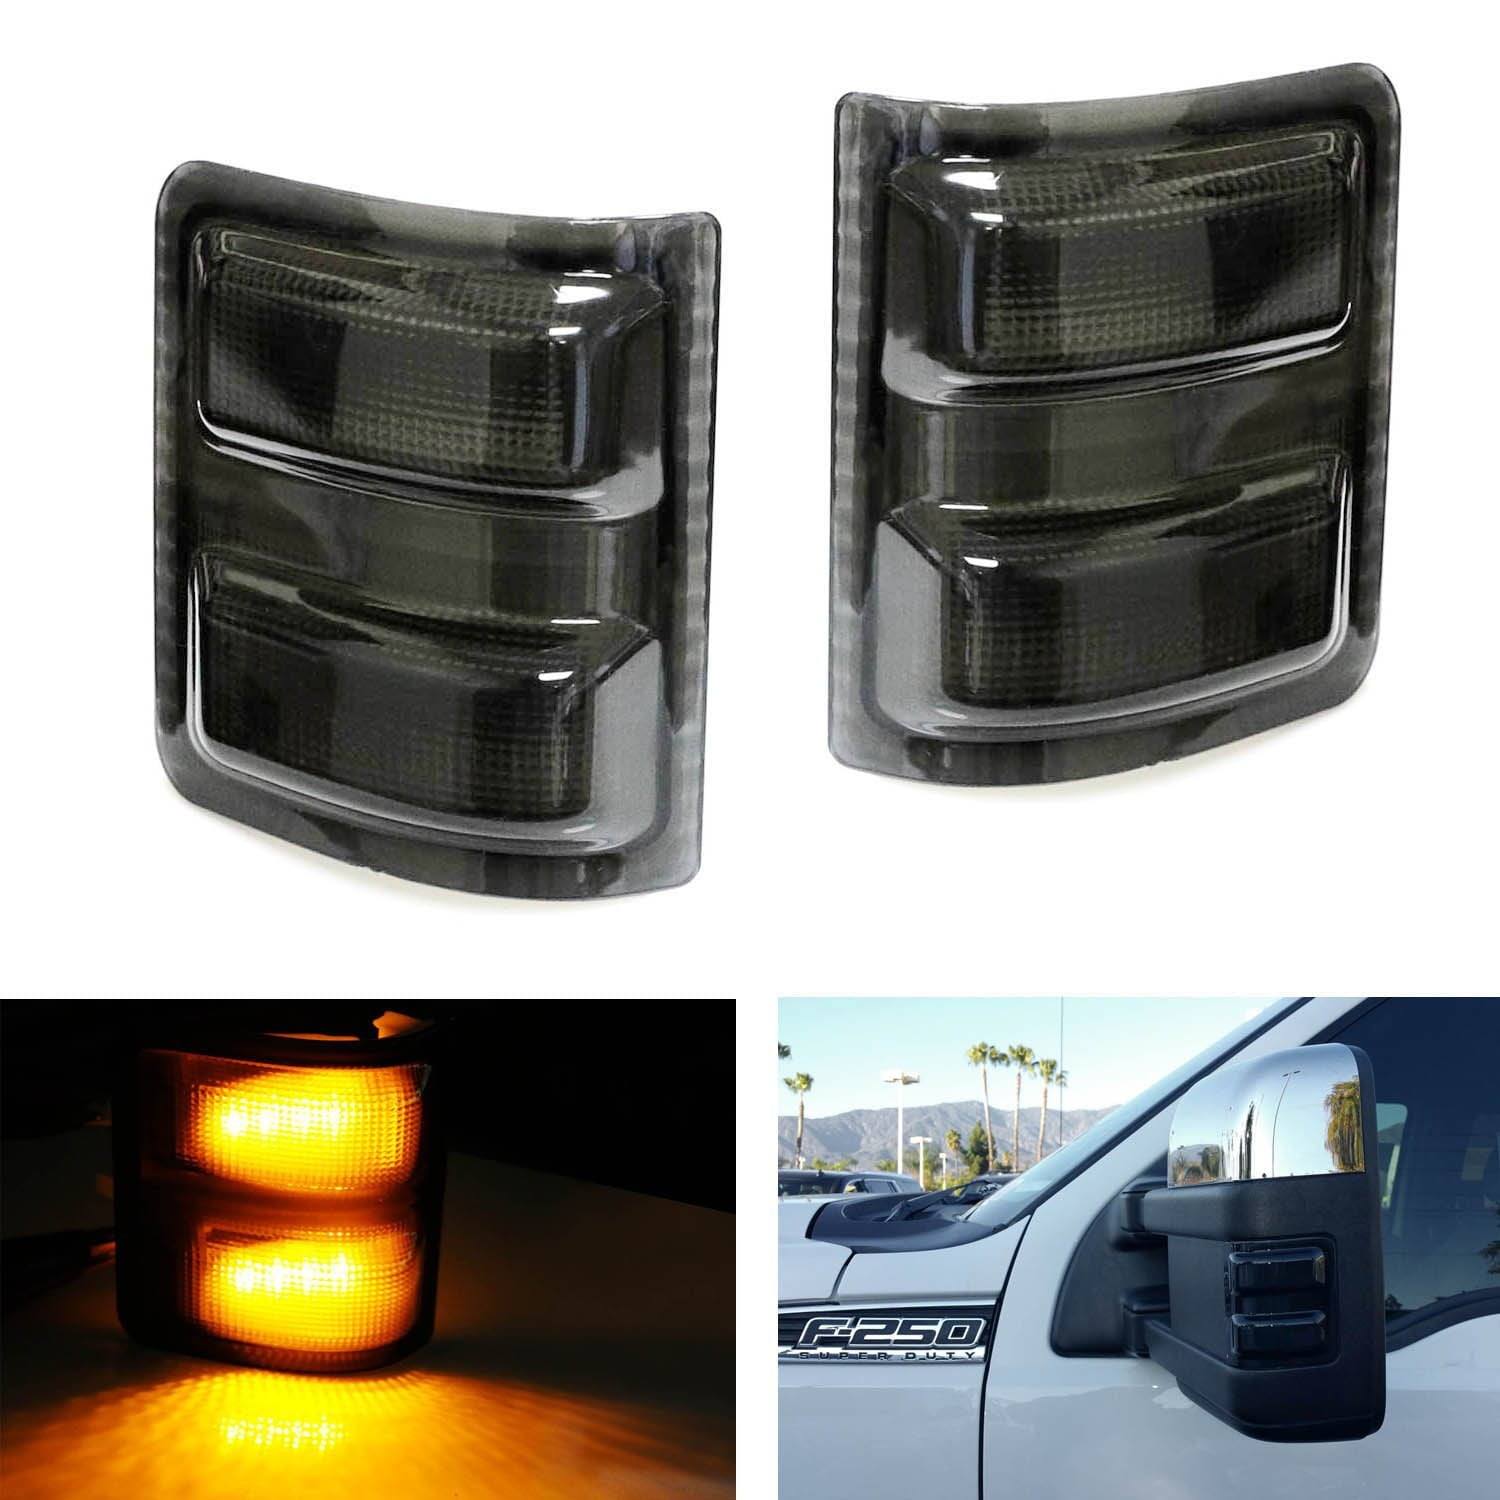 Smoked Lens White LED Parking Light Partsam Smoked Lens Switchback LED Side Mirror Marker Lamps Compatible with 2008-2016 Ford F250 F350 F450 Super Duty, Amber LED Turn Signal Light 2